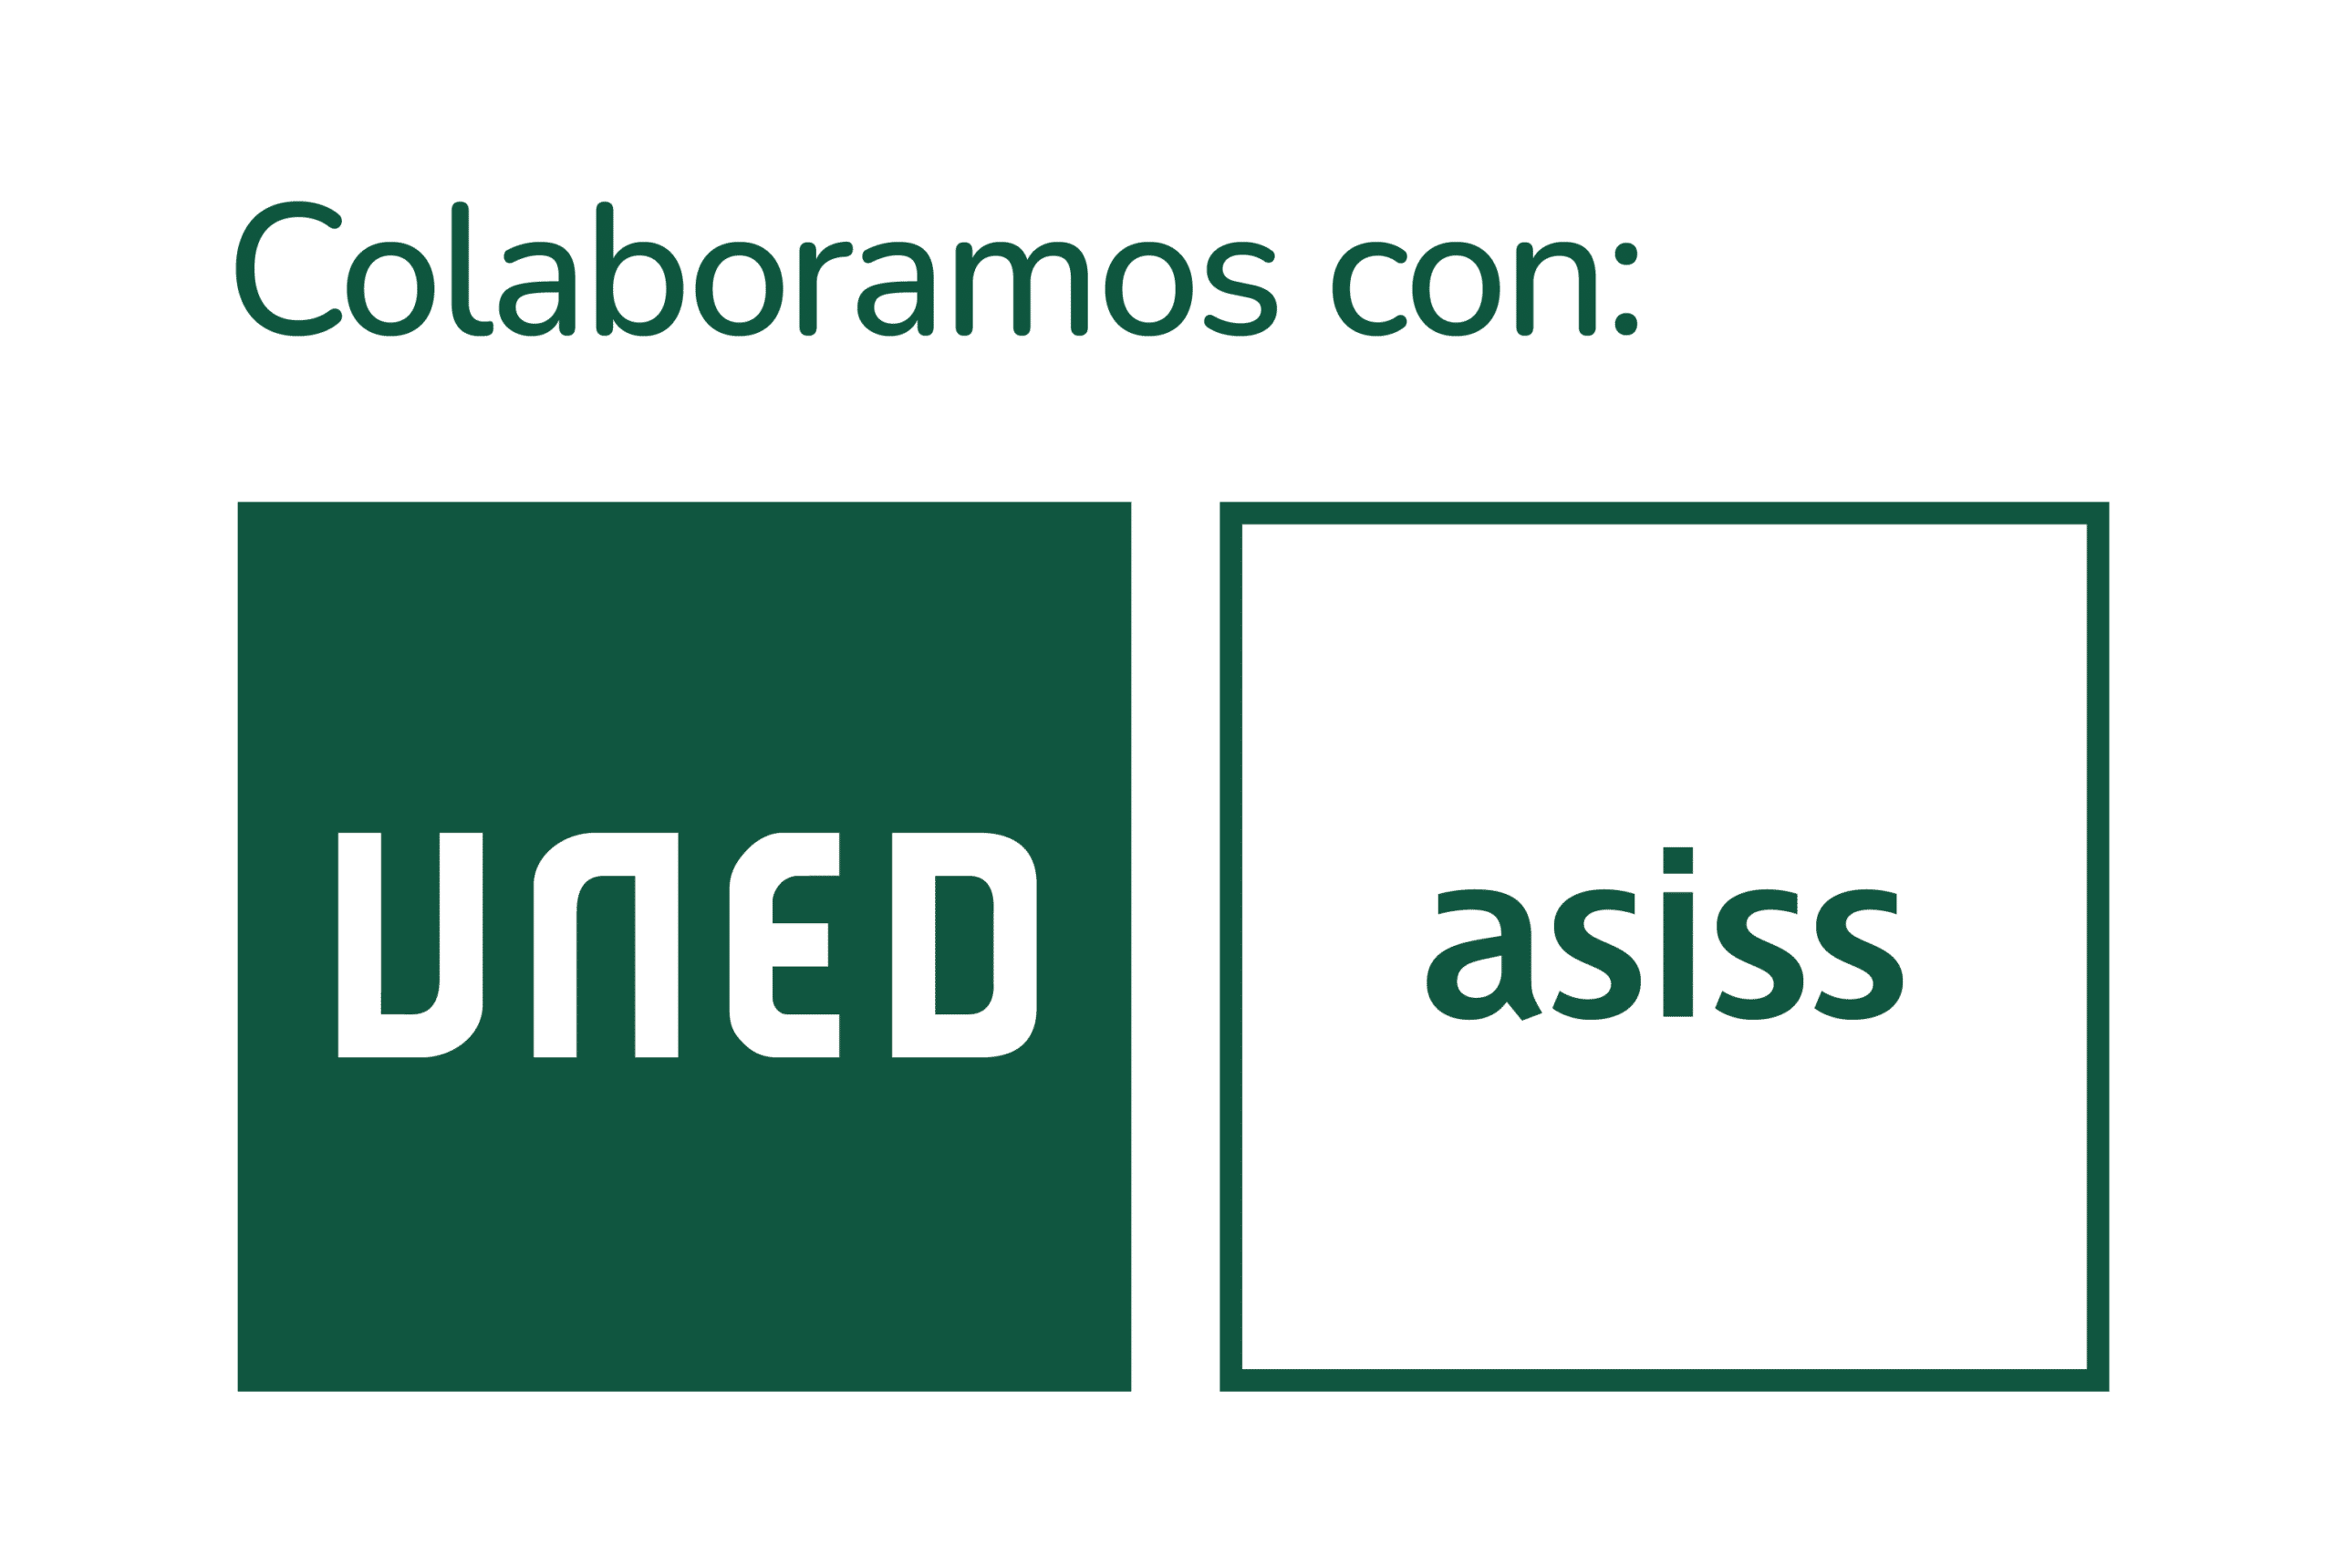 UNEDasiss logo color collaborating entities